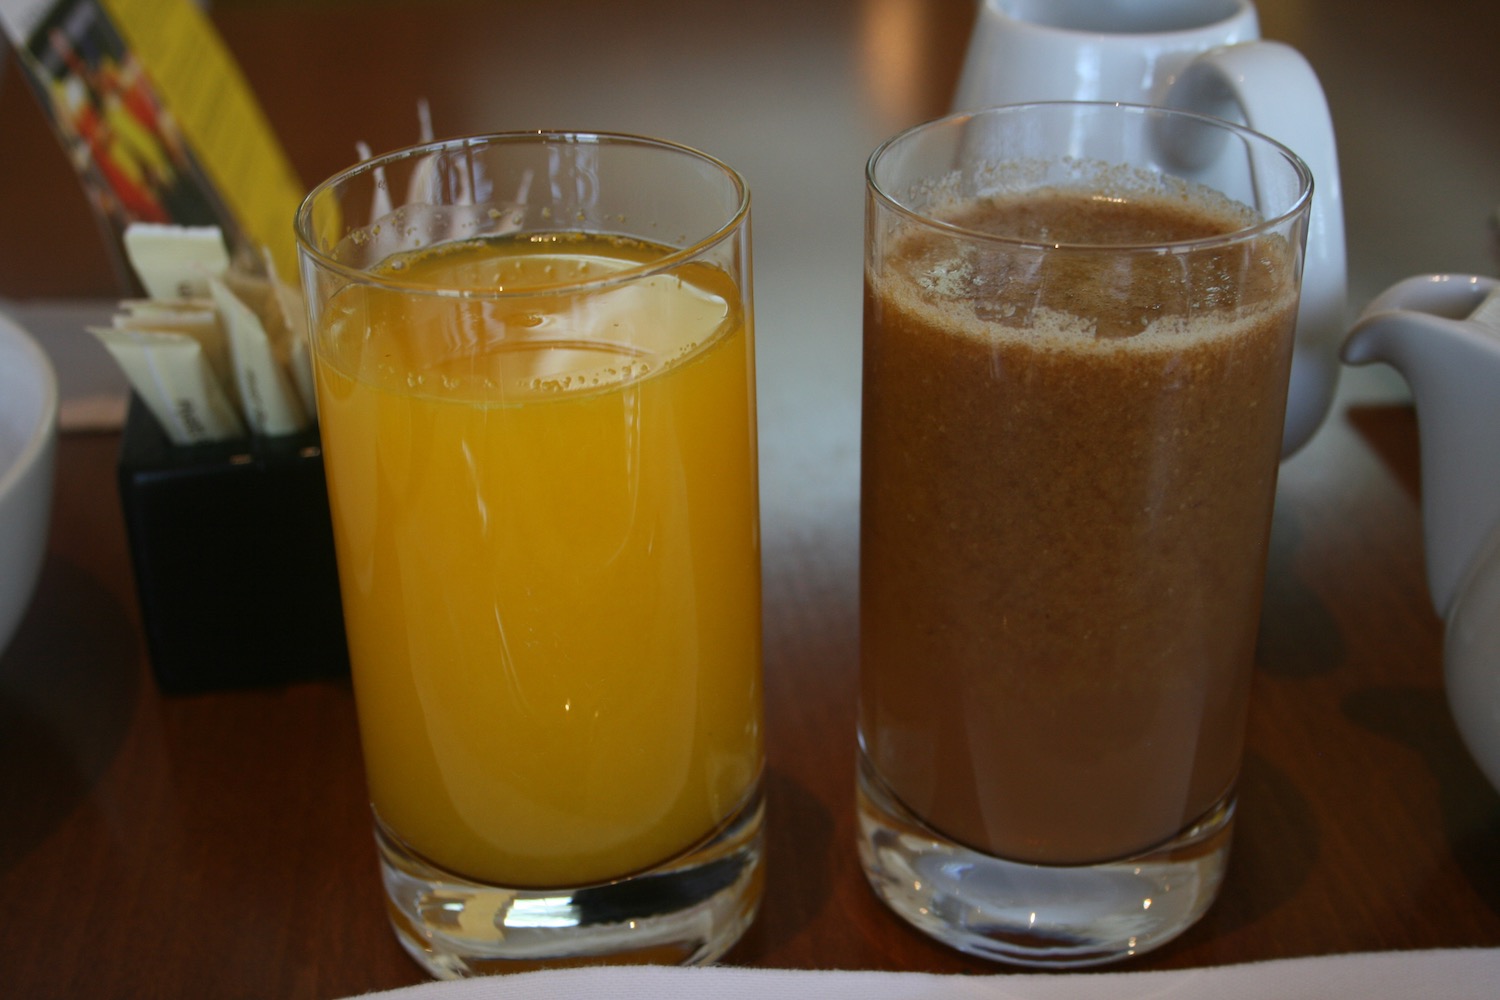 a glass of orange juice and brown liquid